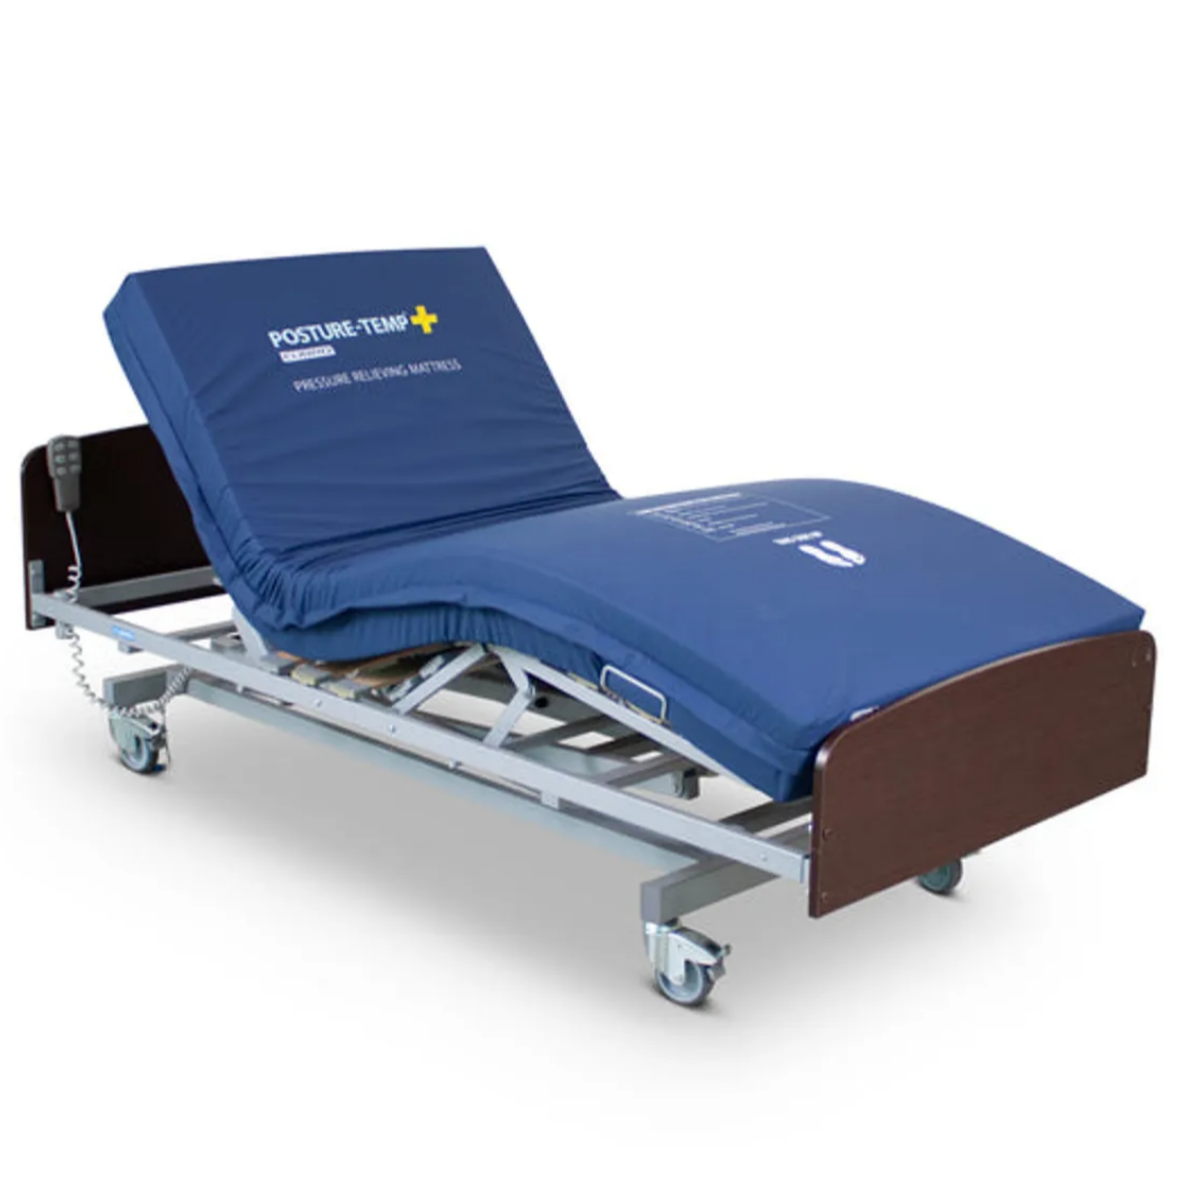 Bock V2 electric bed and mattress